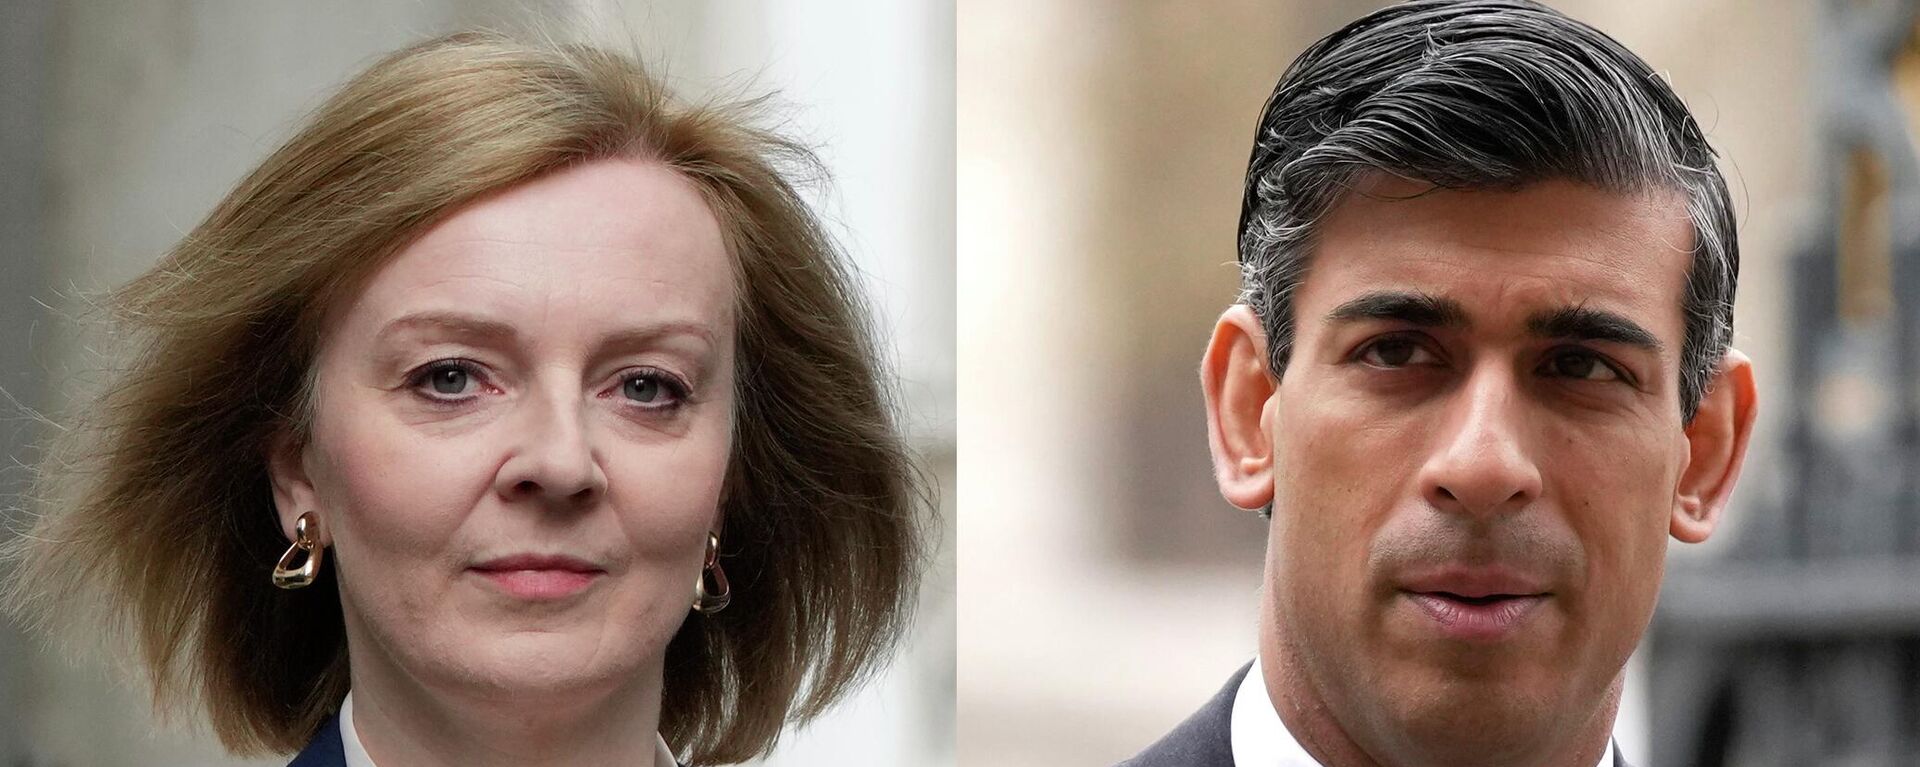 The two candidates in the Conservative Party leadership race, former Chancellor of the Exchequer Rishi Sunak and Foreign Secretary Liz Truss - Sputnik International, 1920, 05.08.2022